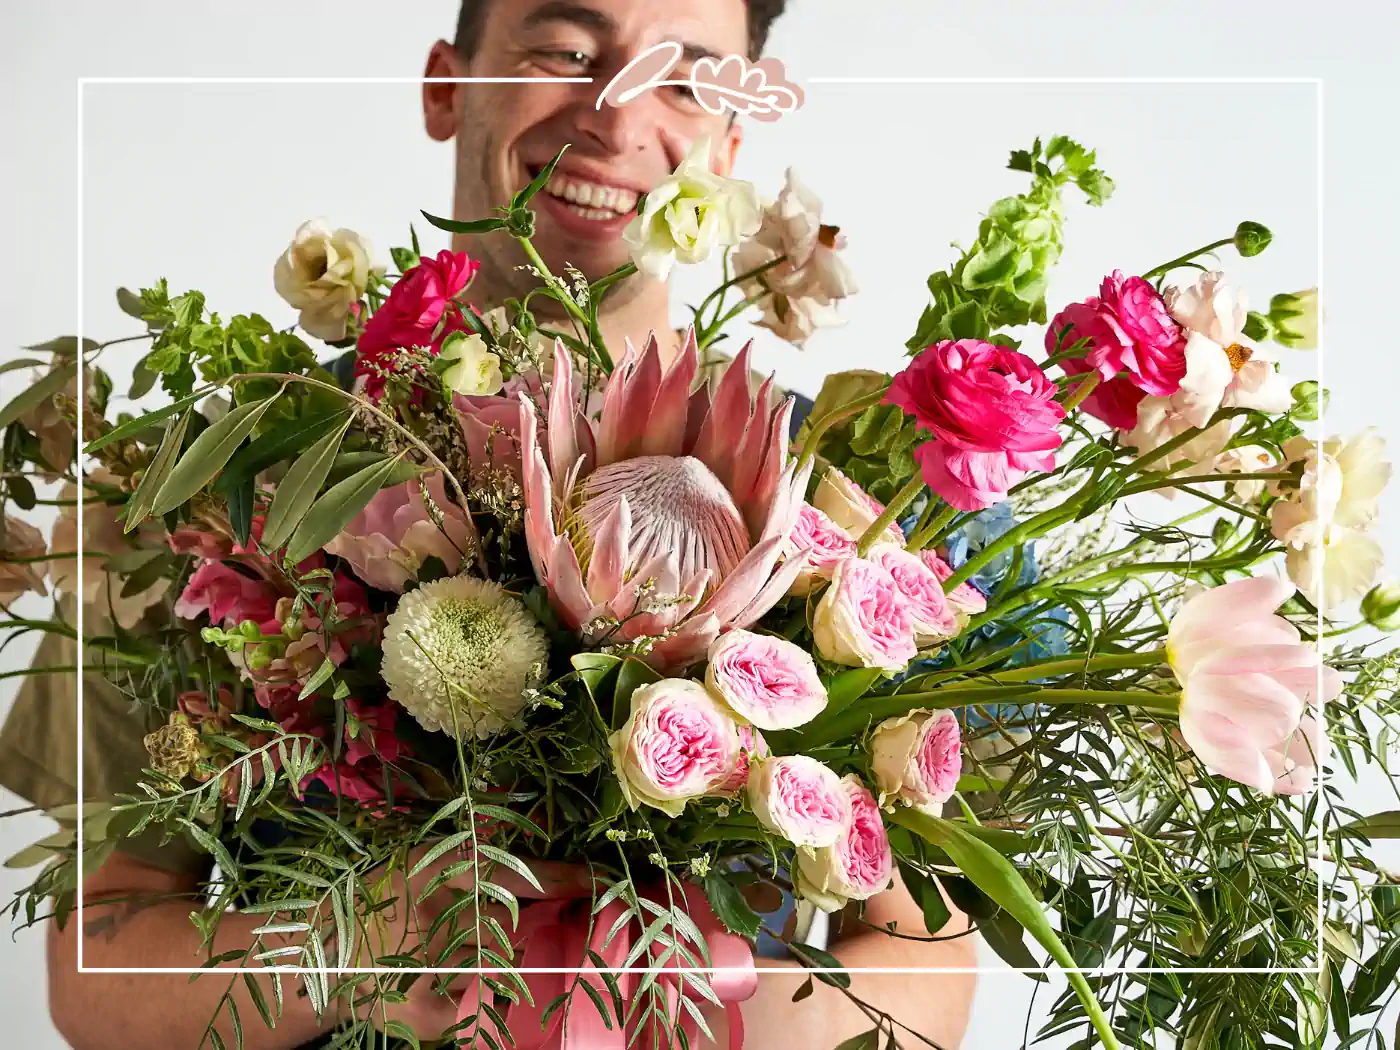 A person holding a vibrant bouquet of various flowers including pink roses and proteas. Fabulous Flowers and Gifts - Birthday Collection.